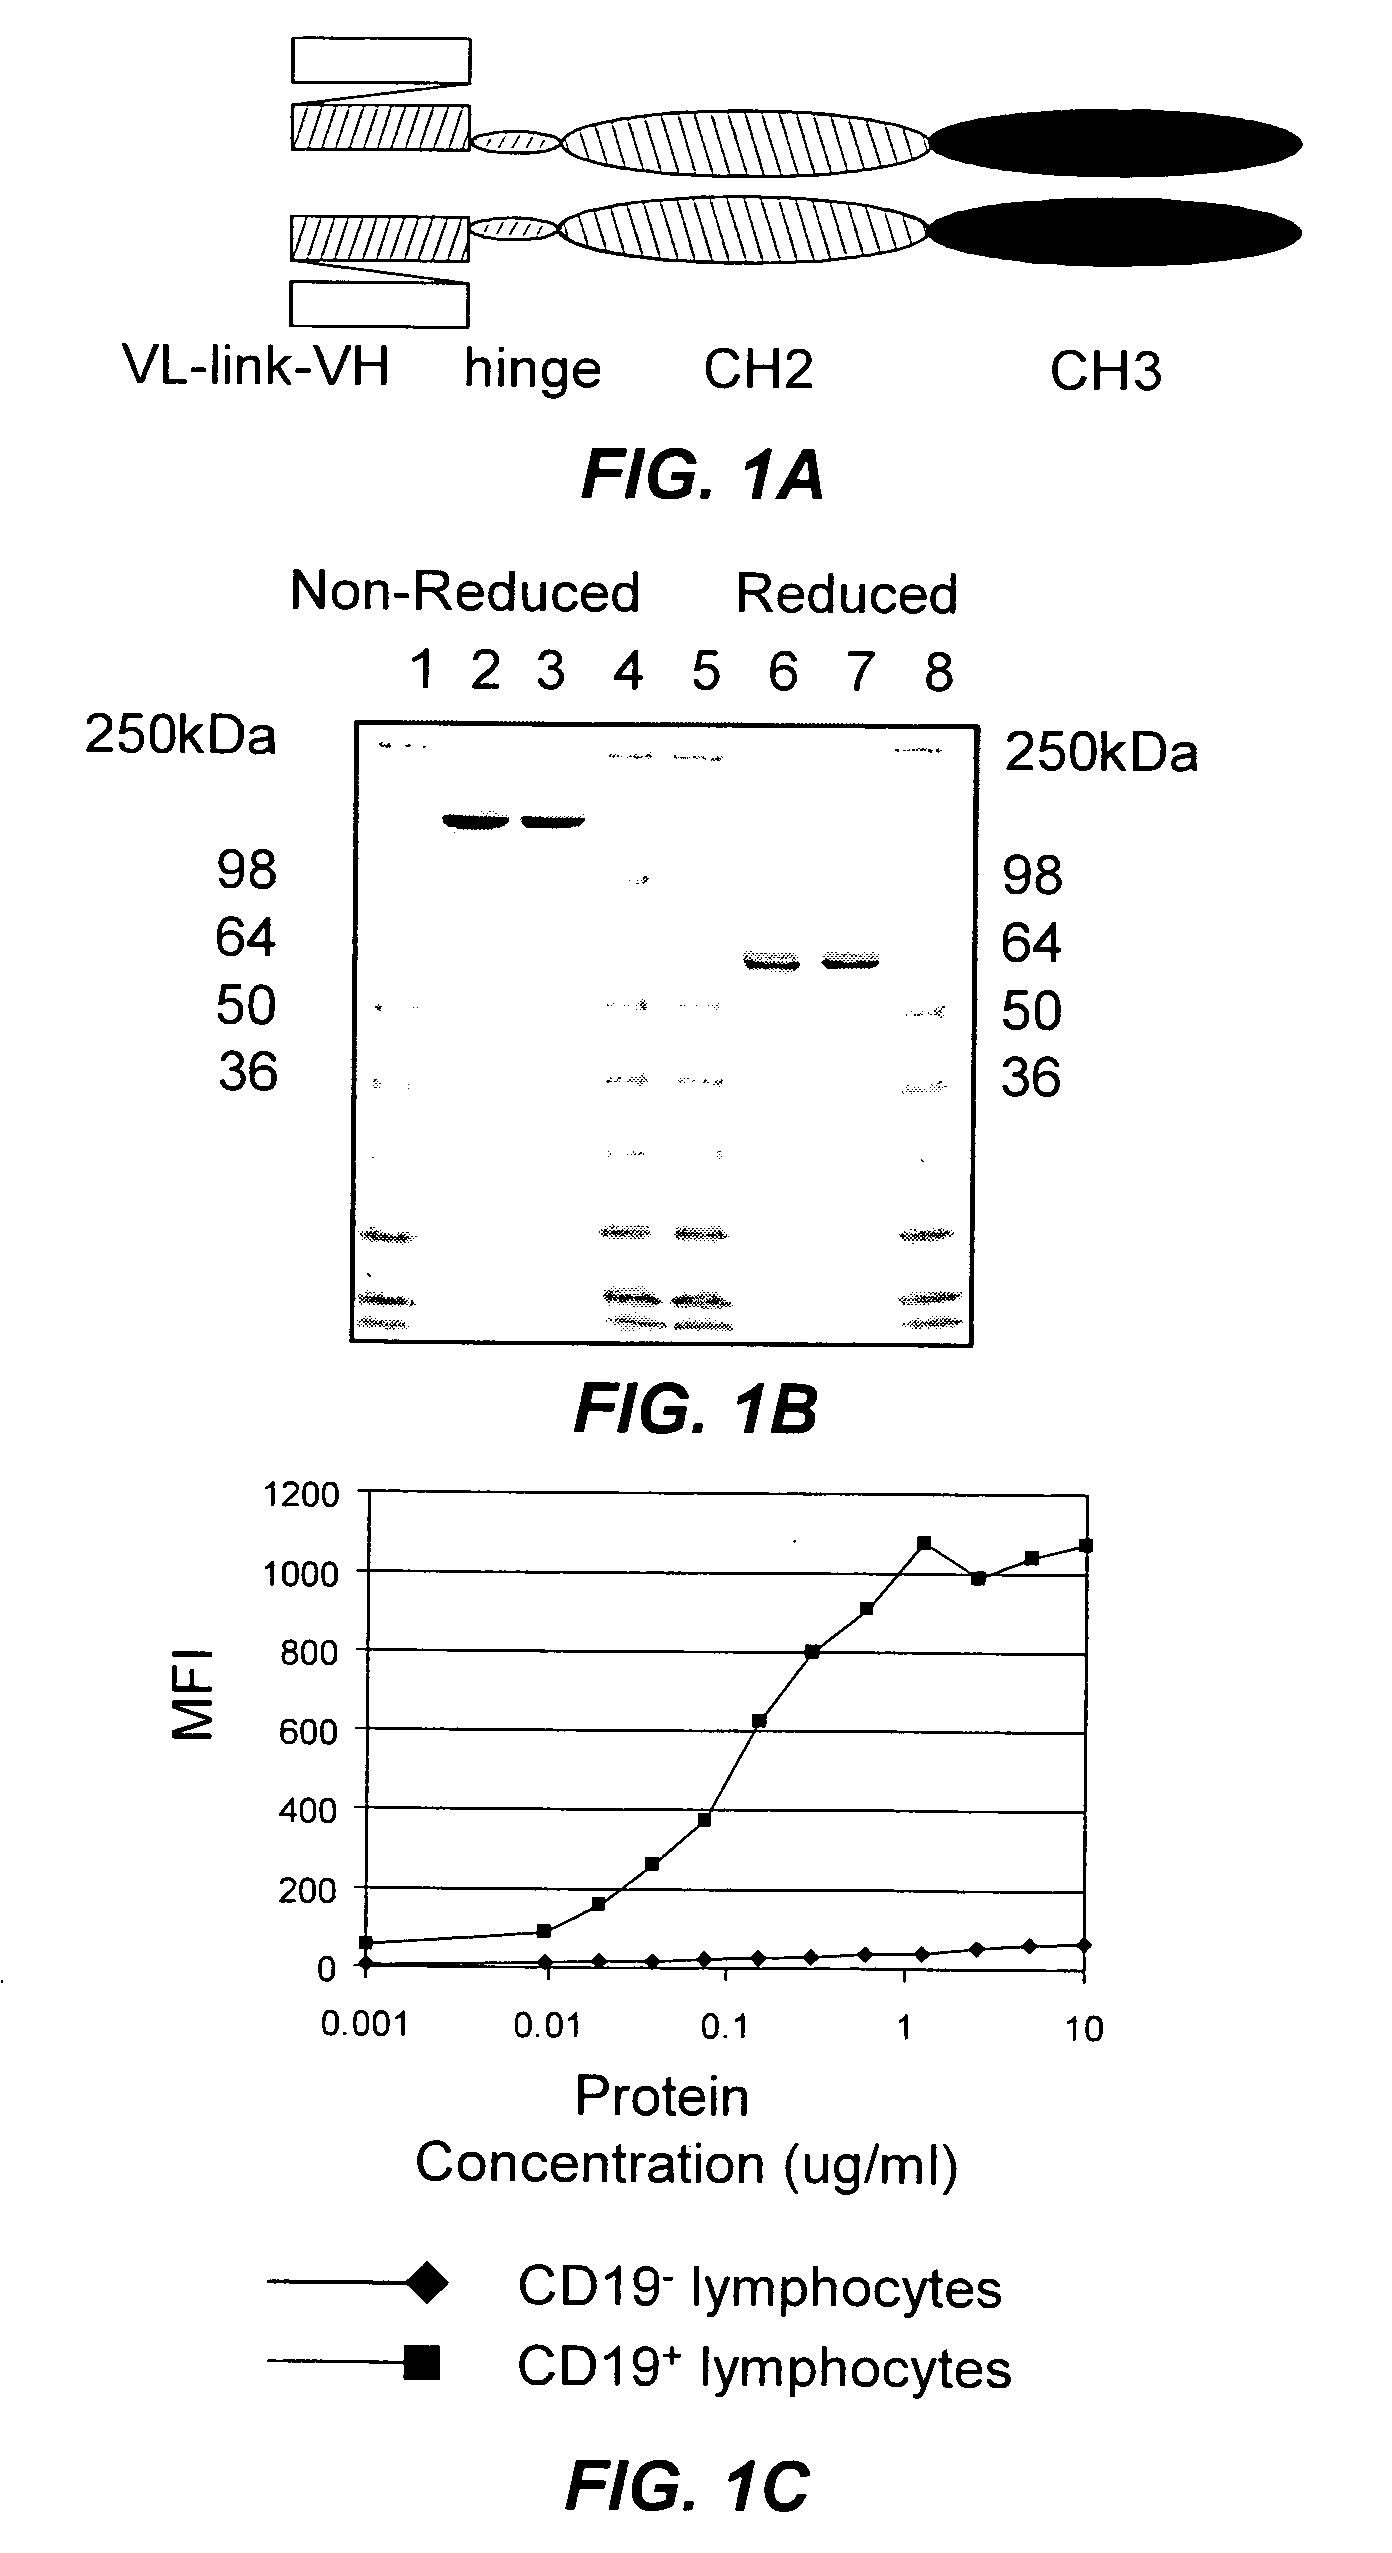 B-cell reduction using CD37-specific and CD20-specific binding molecules